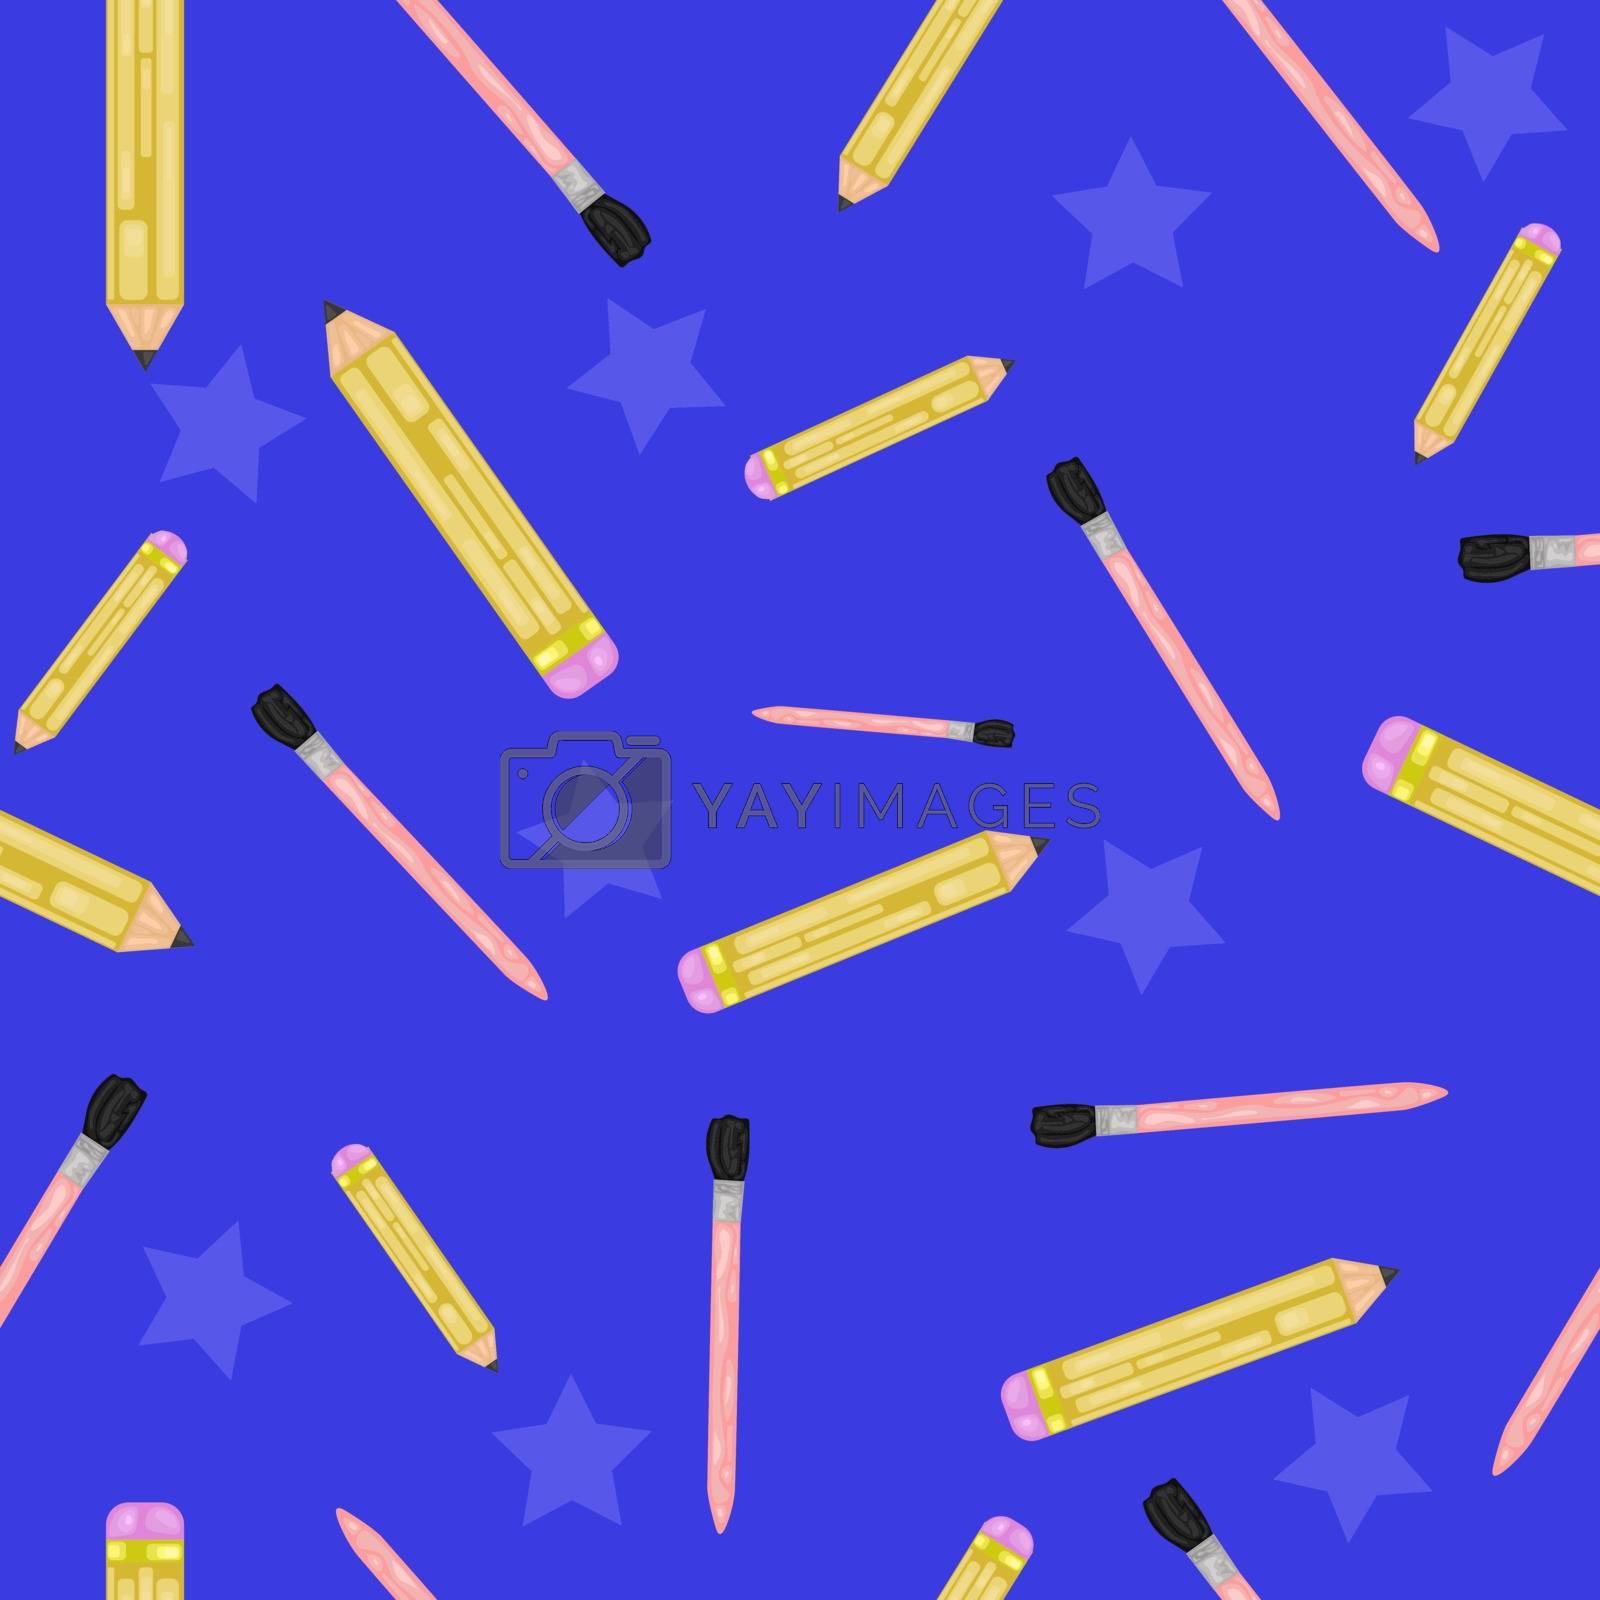 Royalty free image of seamless pattern of brushes and pencils. vector illustration by zaryov